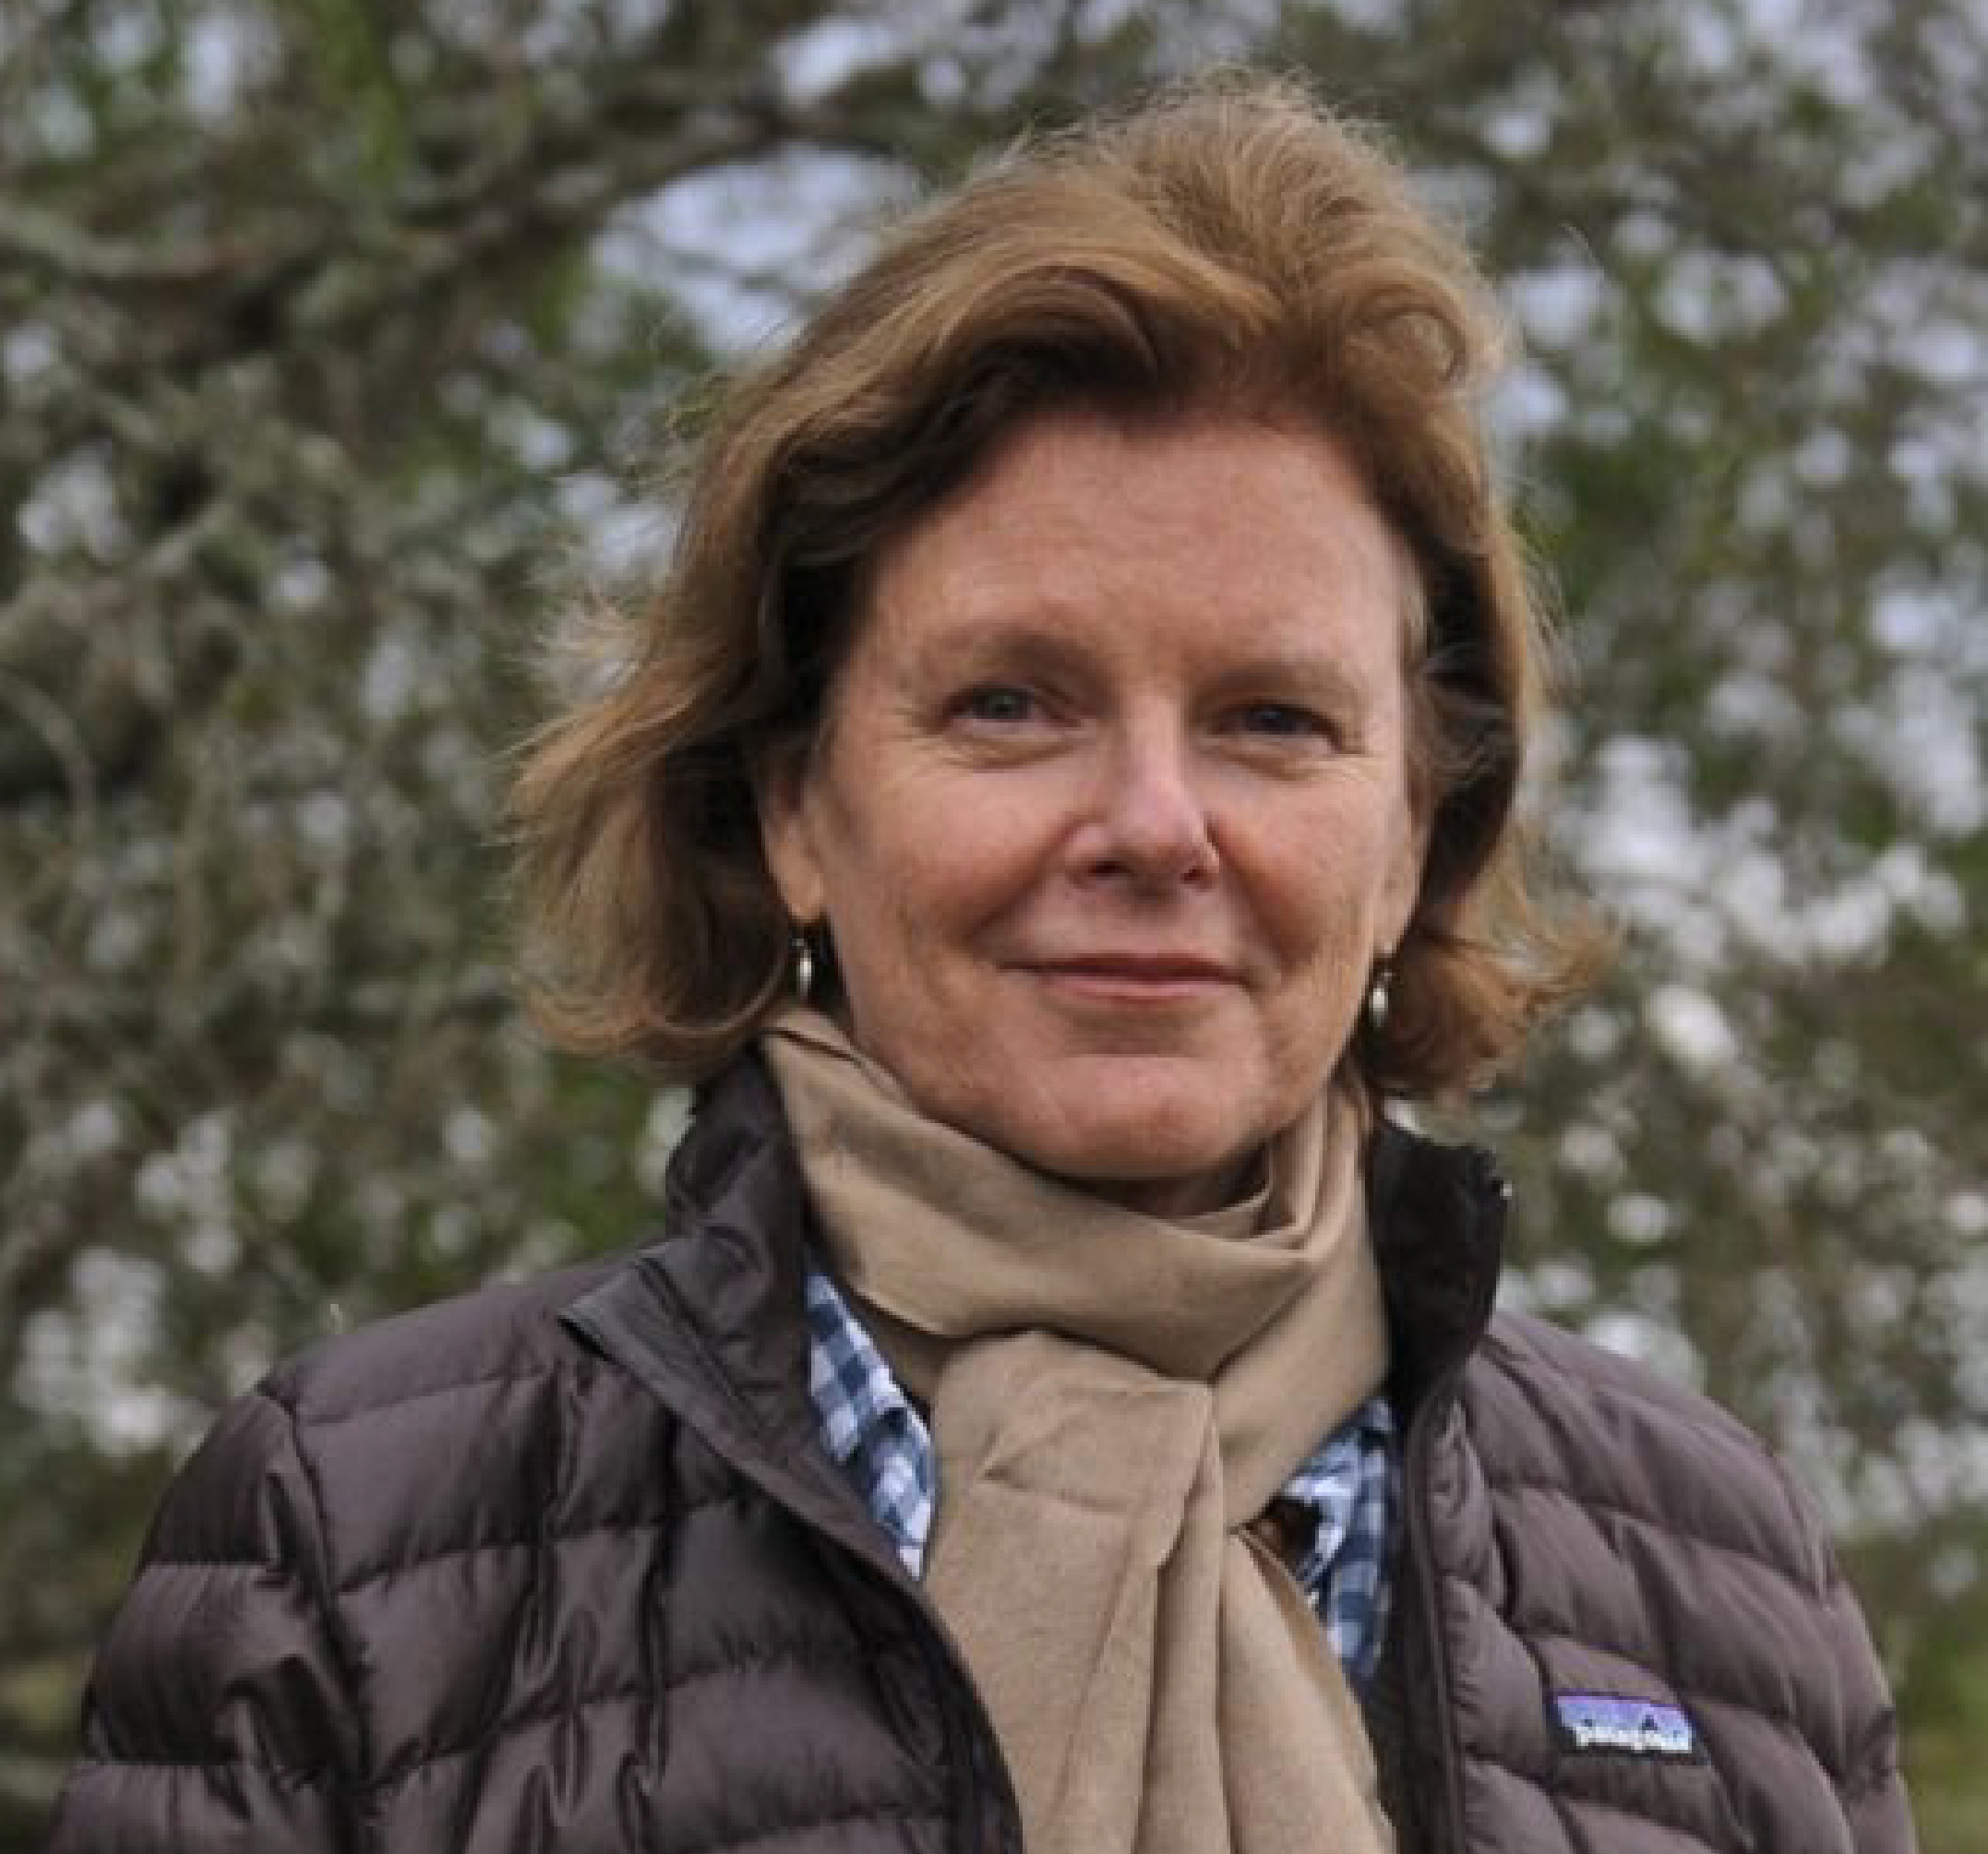 Kris Tompkins, conservationist and former CEO of Patagonia, Inc.